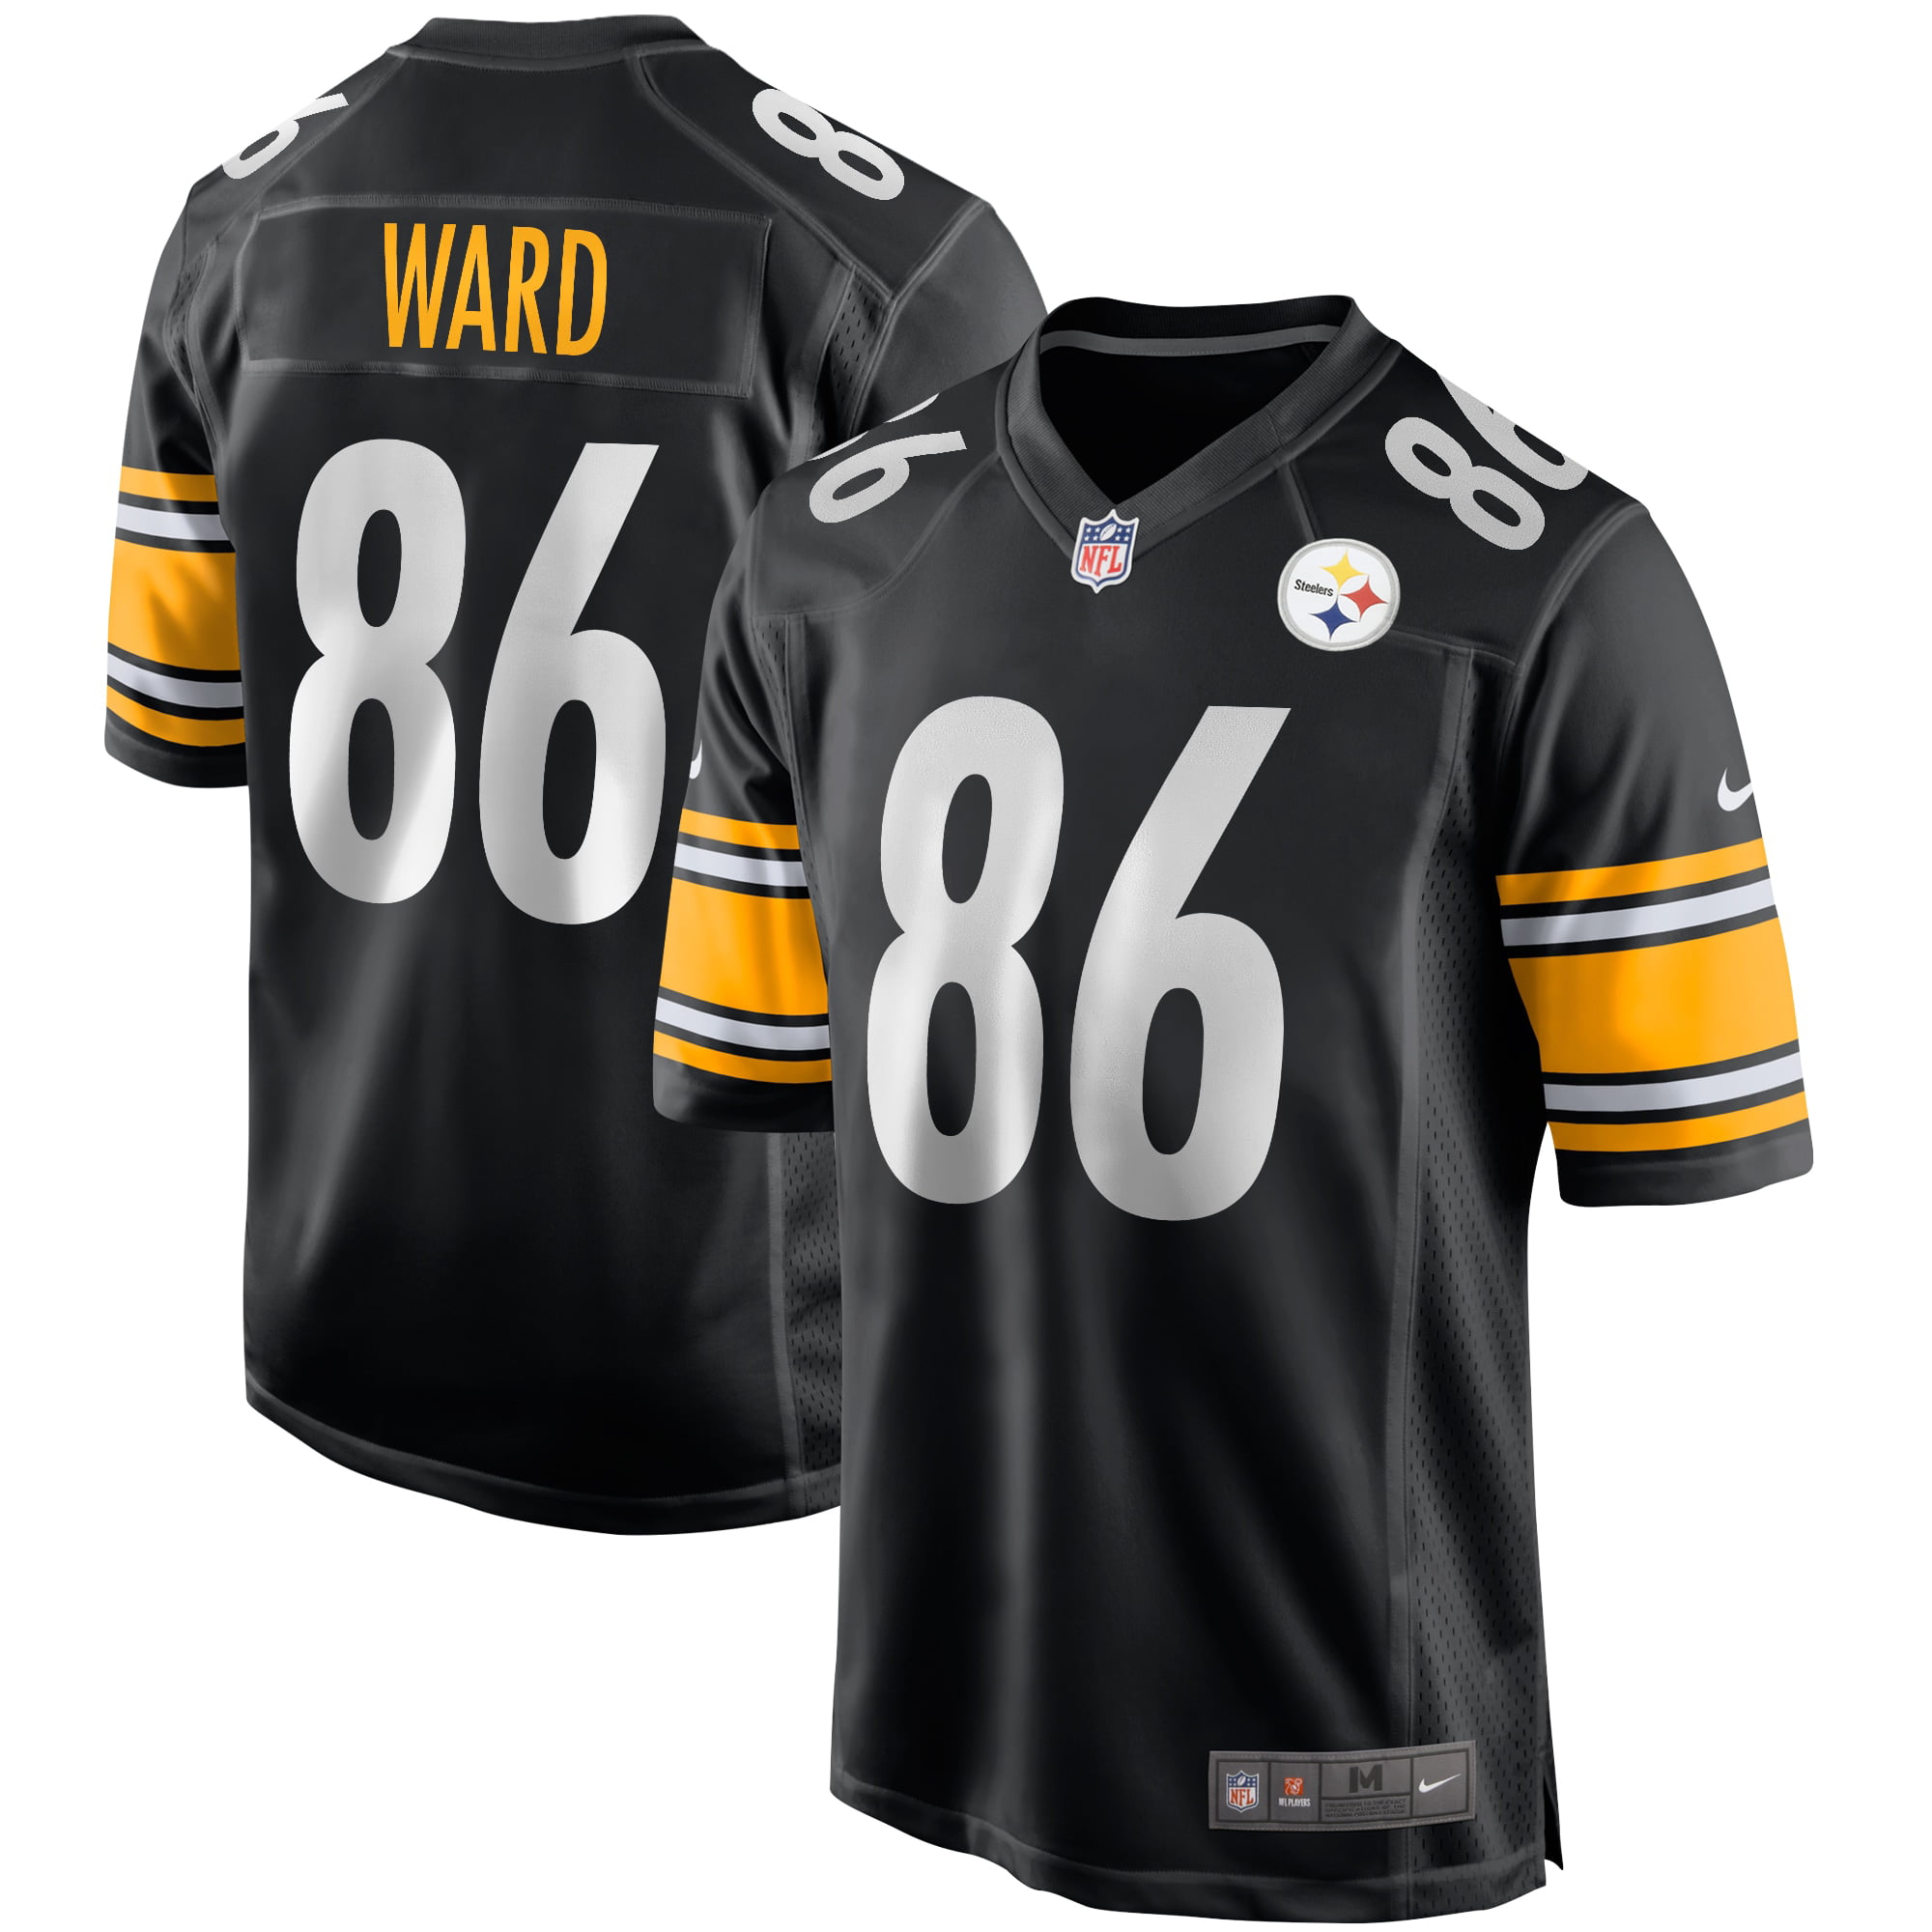 steelers new all black jersey